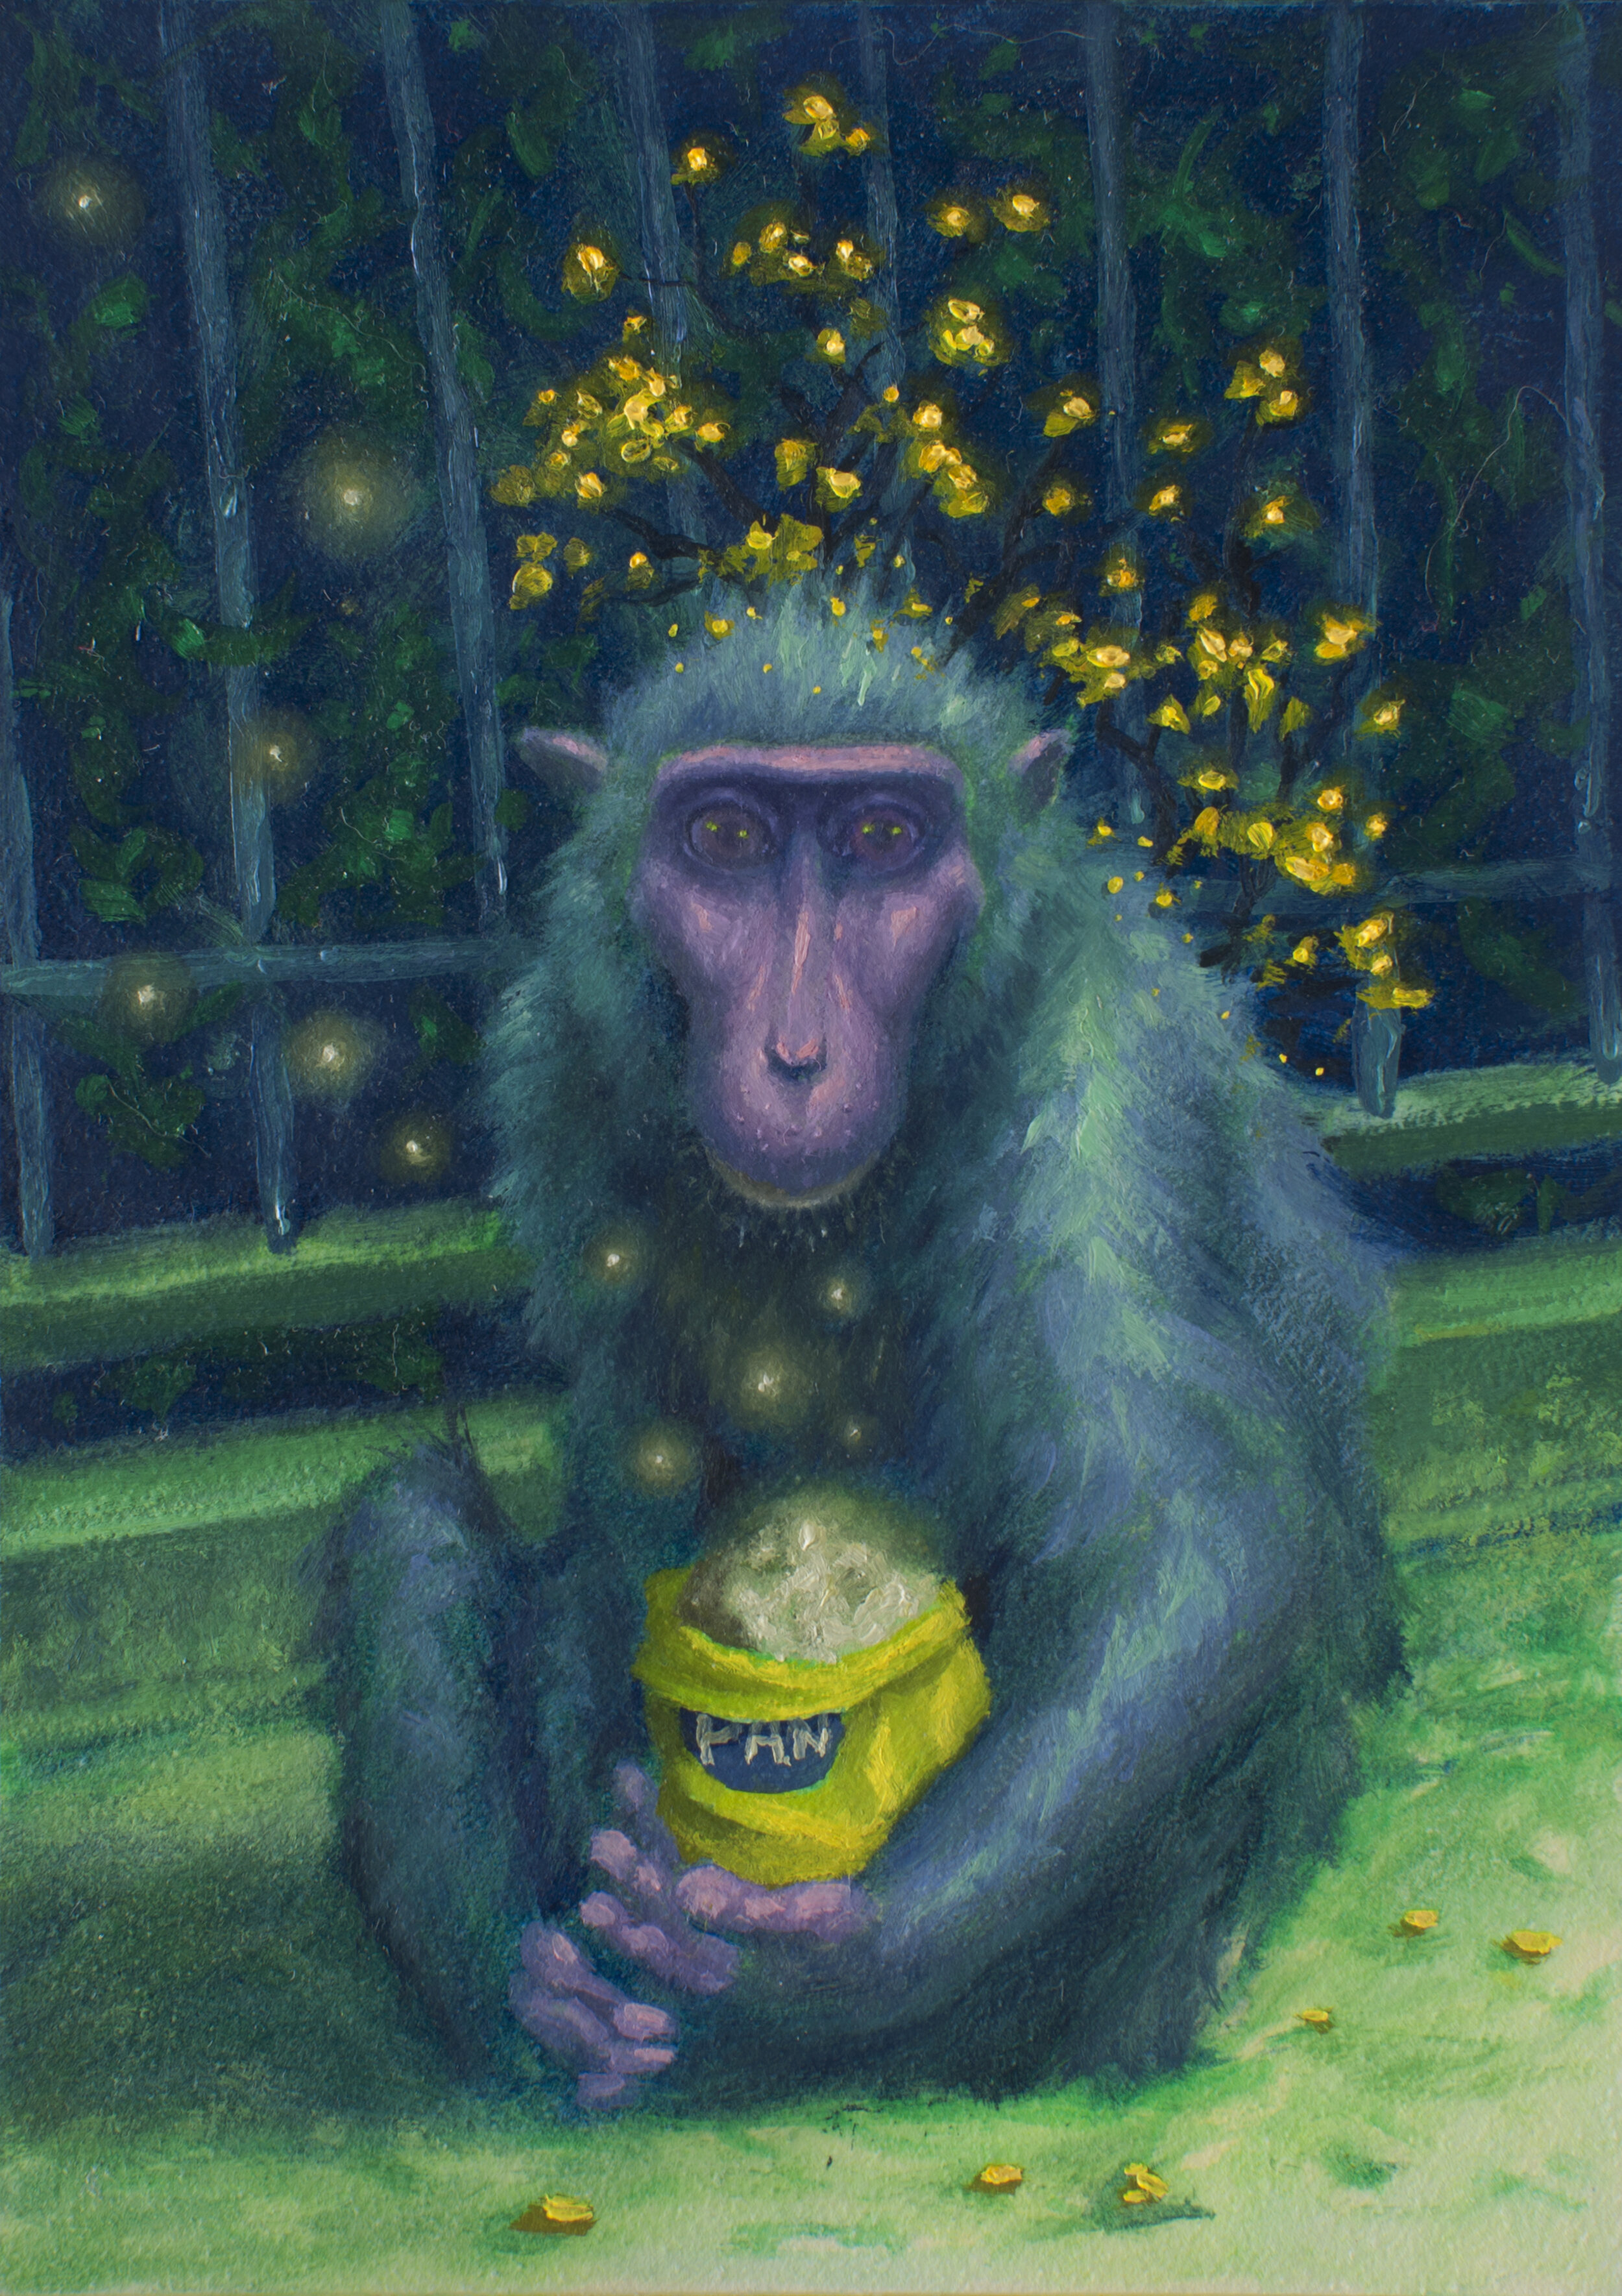   Macaco , 5 x 7 inches, oil on panel, 2018 